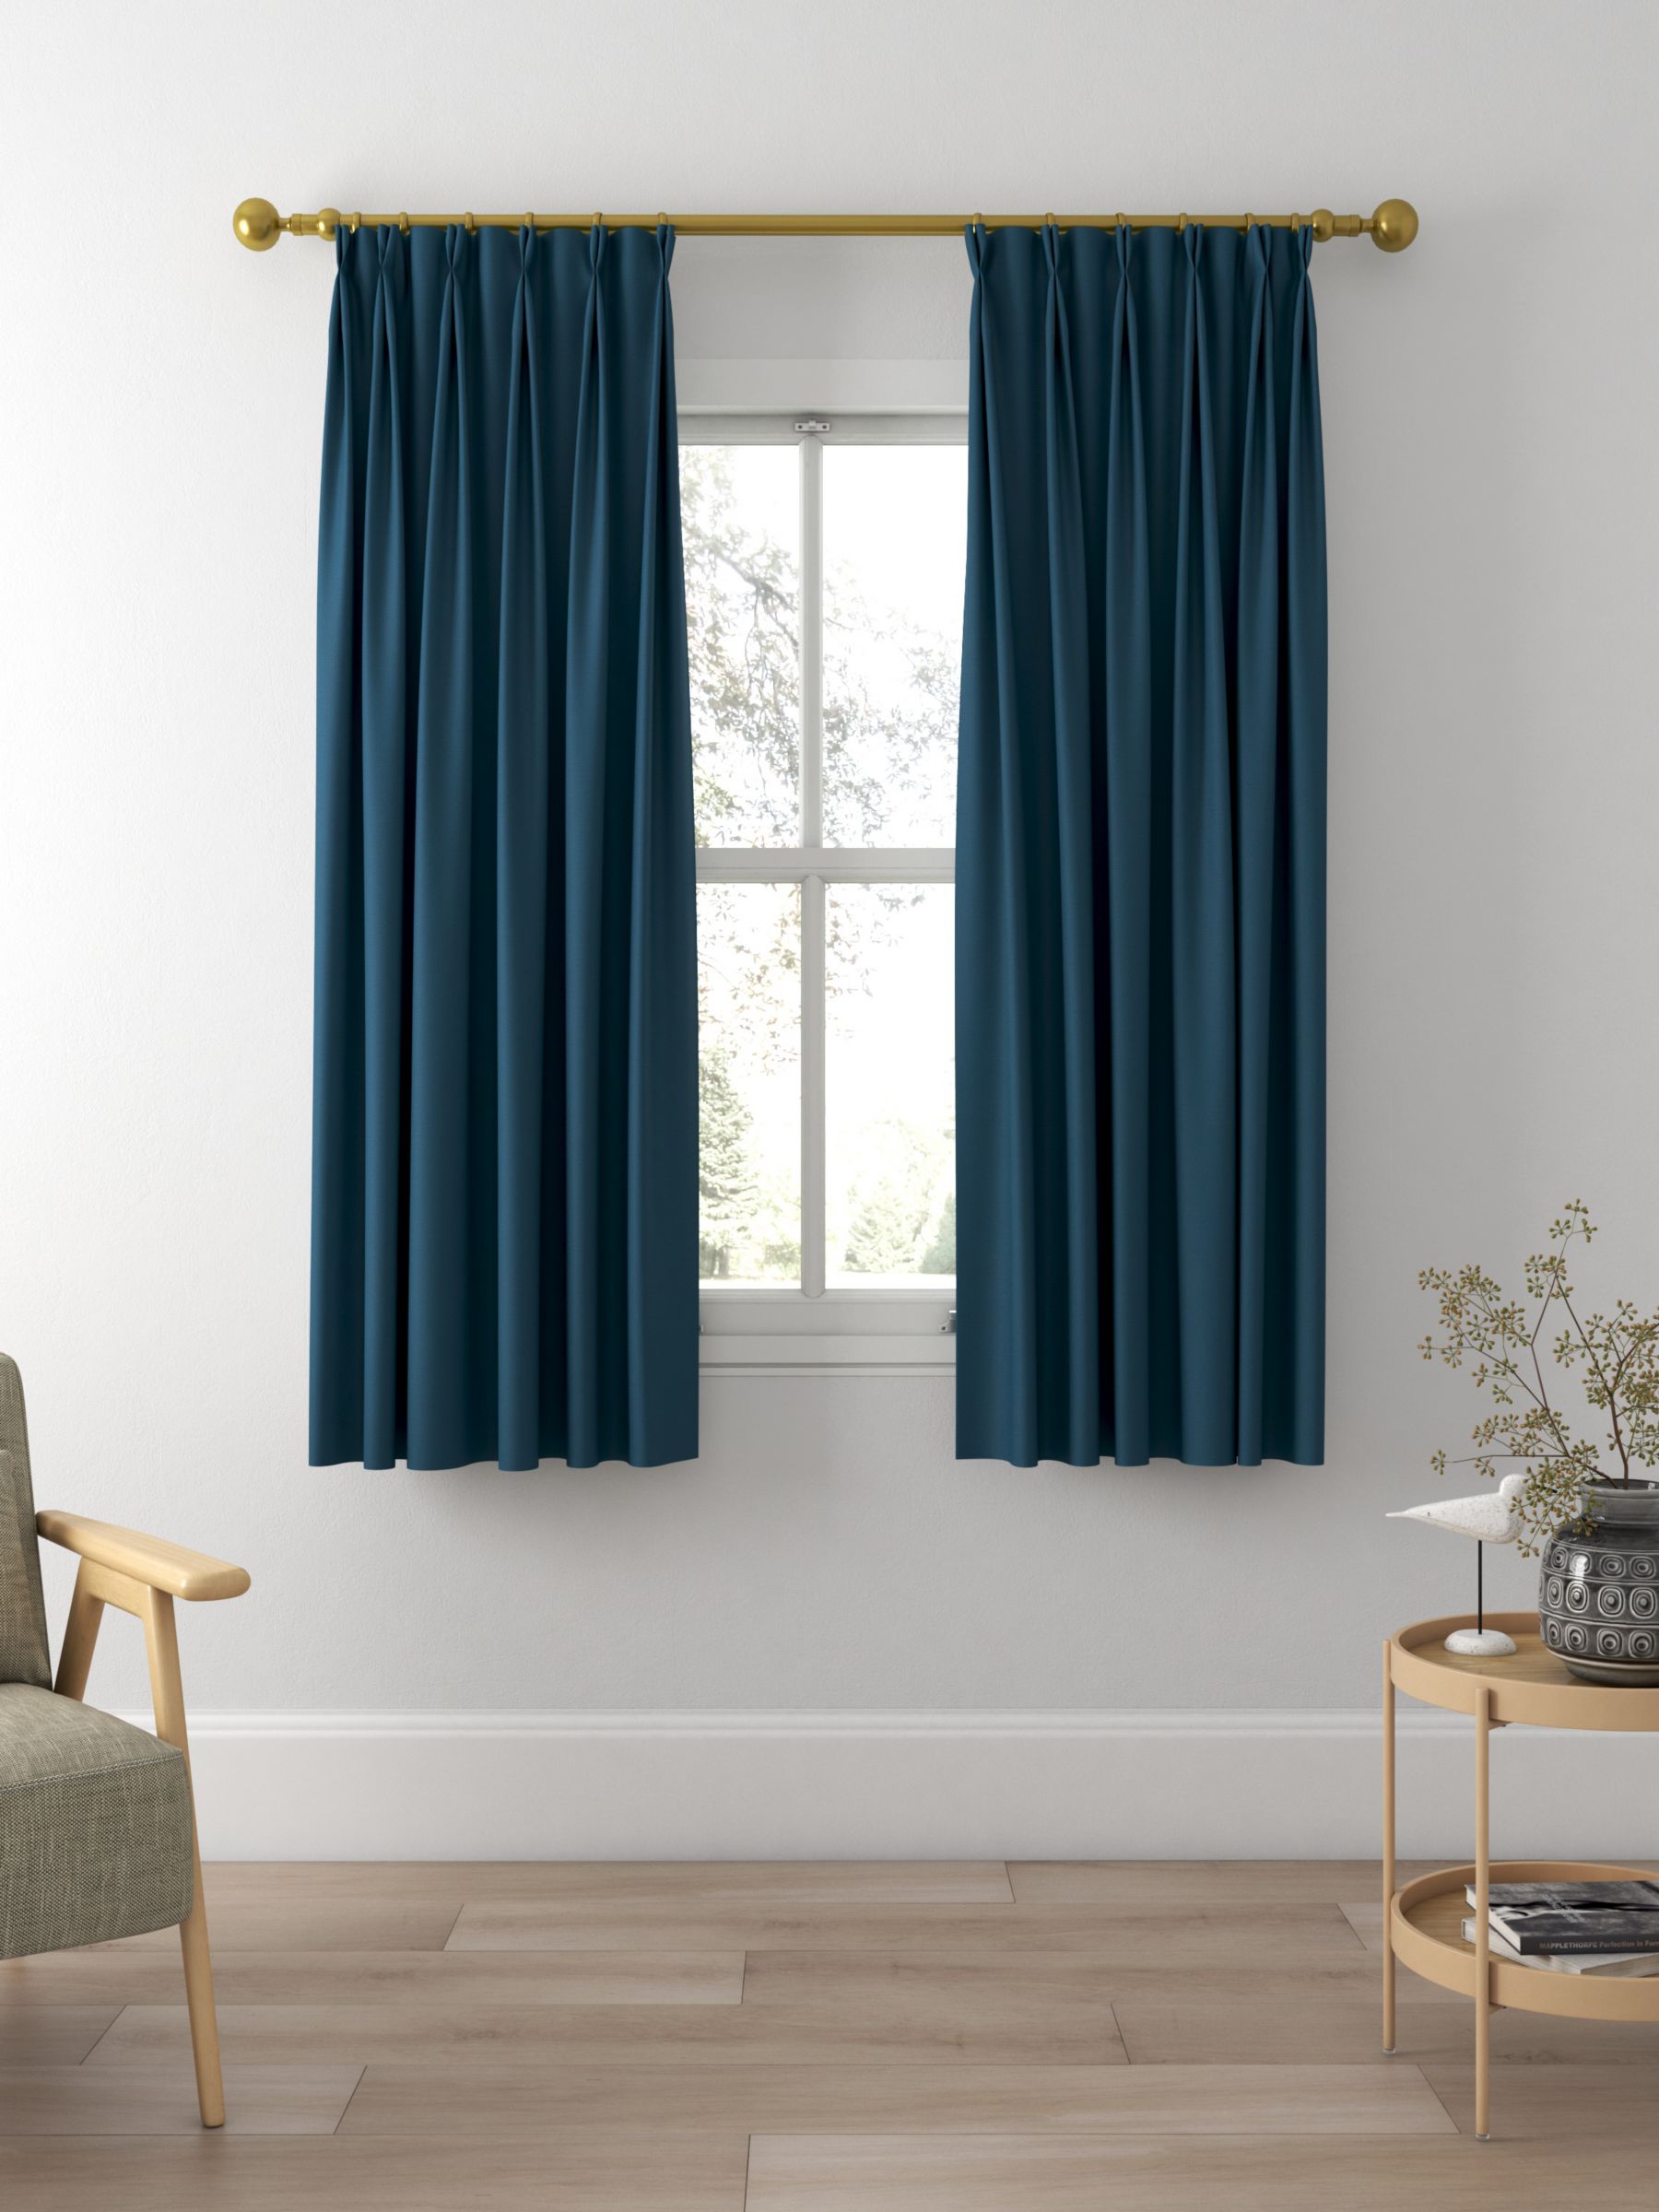 Sanderson Tuscany II Made to Measure Curtains, Navy